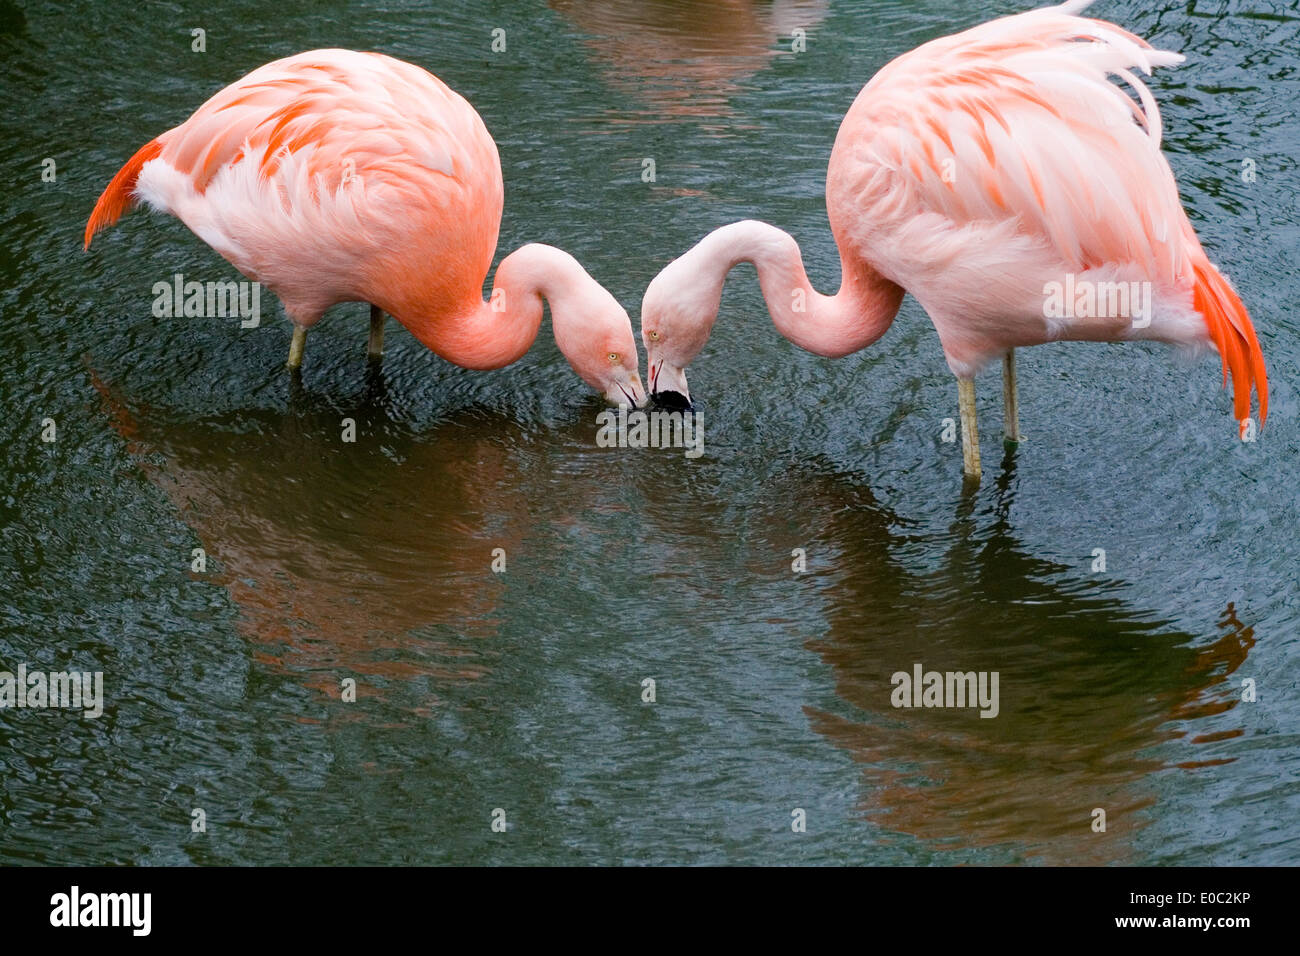 Thirsty Work, two pink flamingos take a drink together. Stock Photo